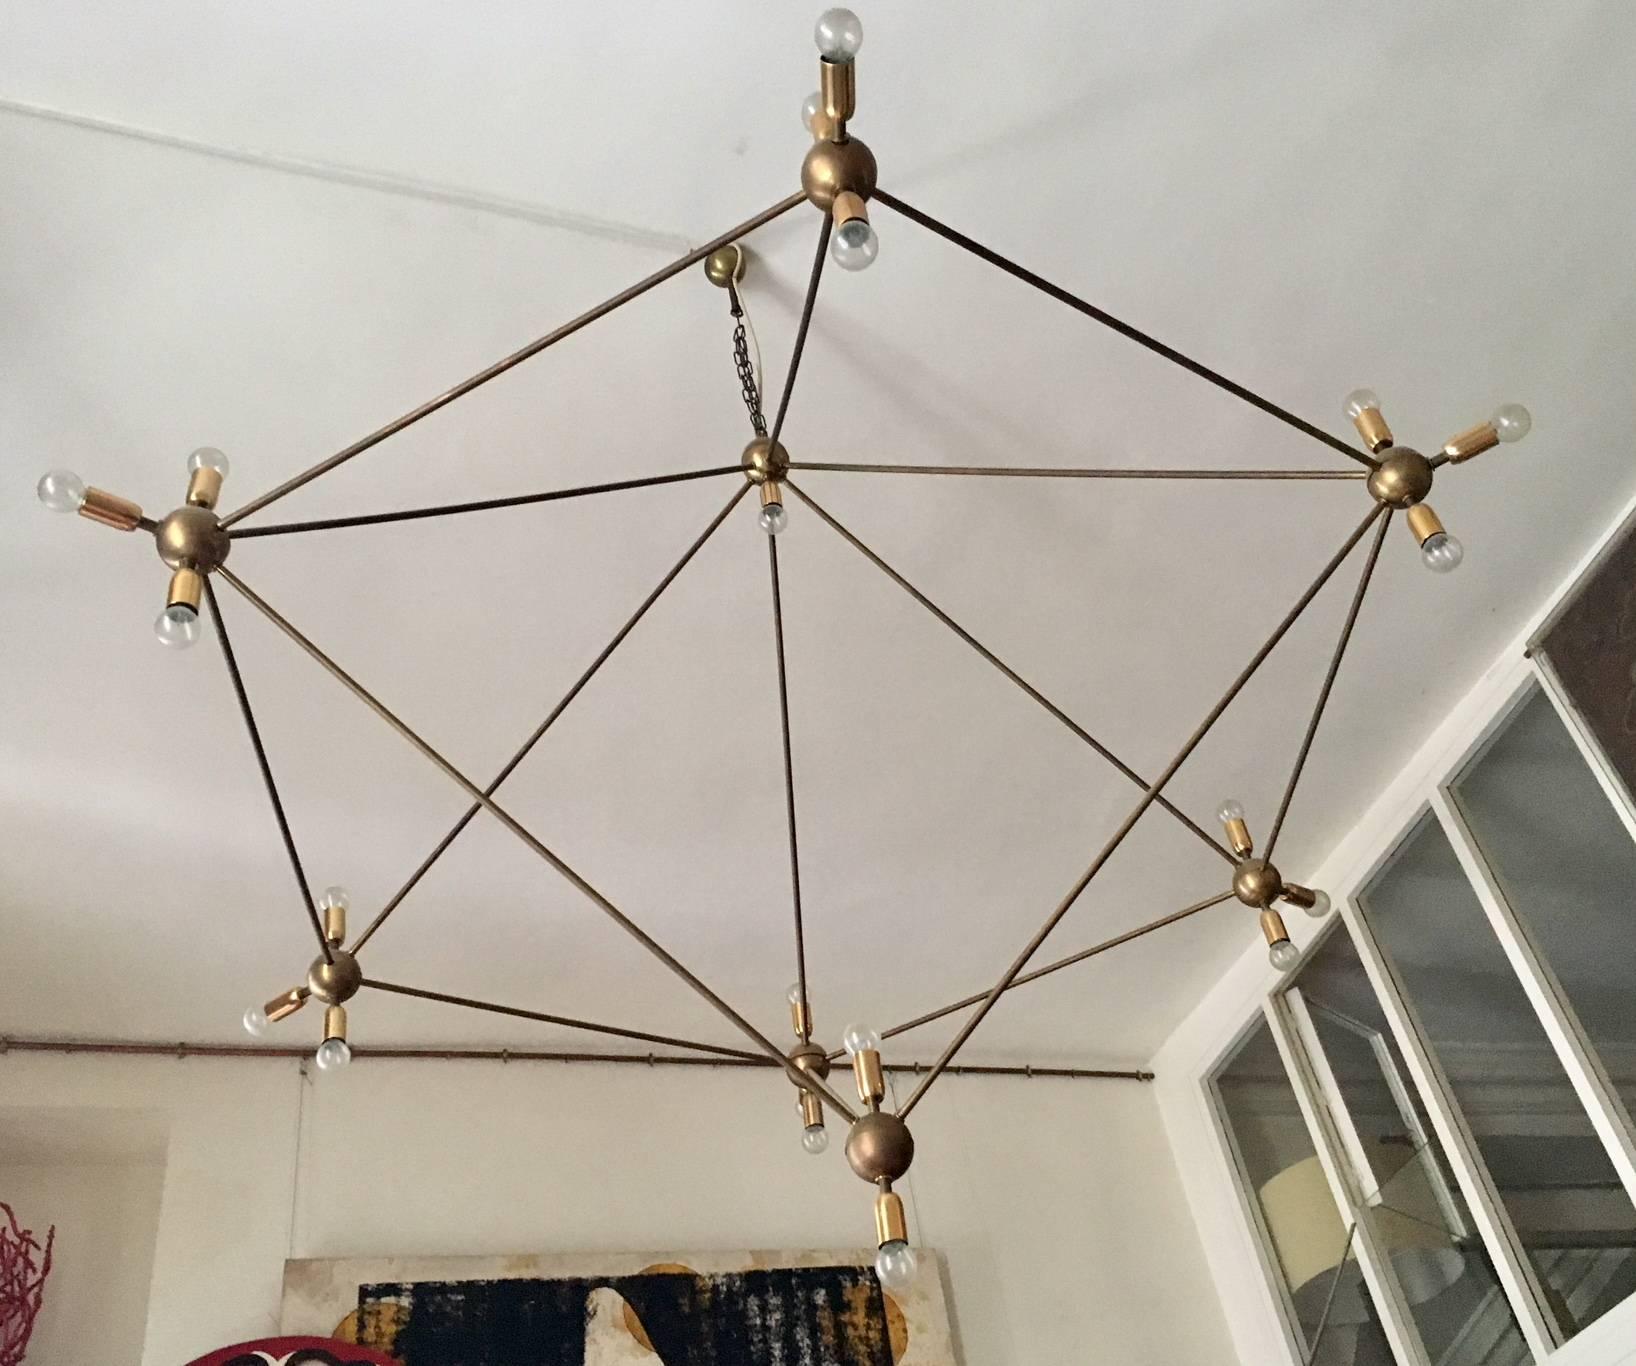 A gigantic chandelier, the asymmetrical pentagonal abstract shaped structure, made of solid brass, with light bronze age patina, create a spectacular illusion of asymmetrical lines and perspectives.
The maximum diameter is 78 in (200 cm) by 63 in